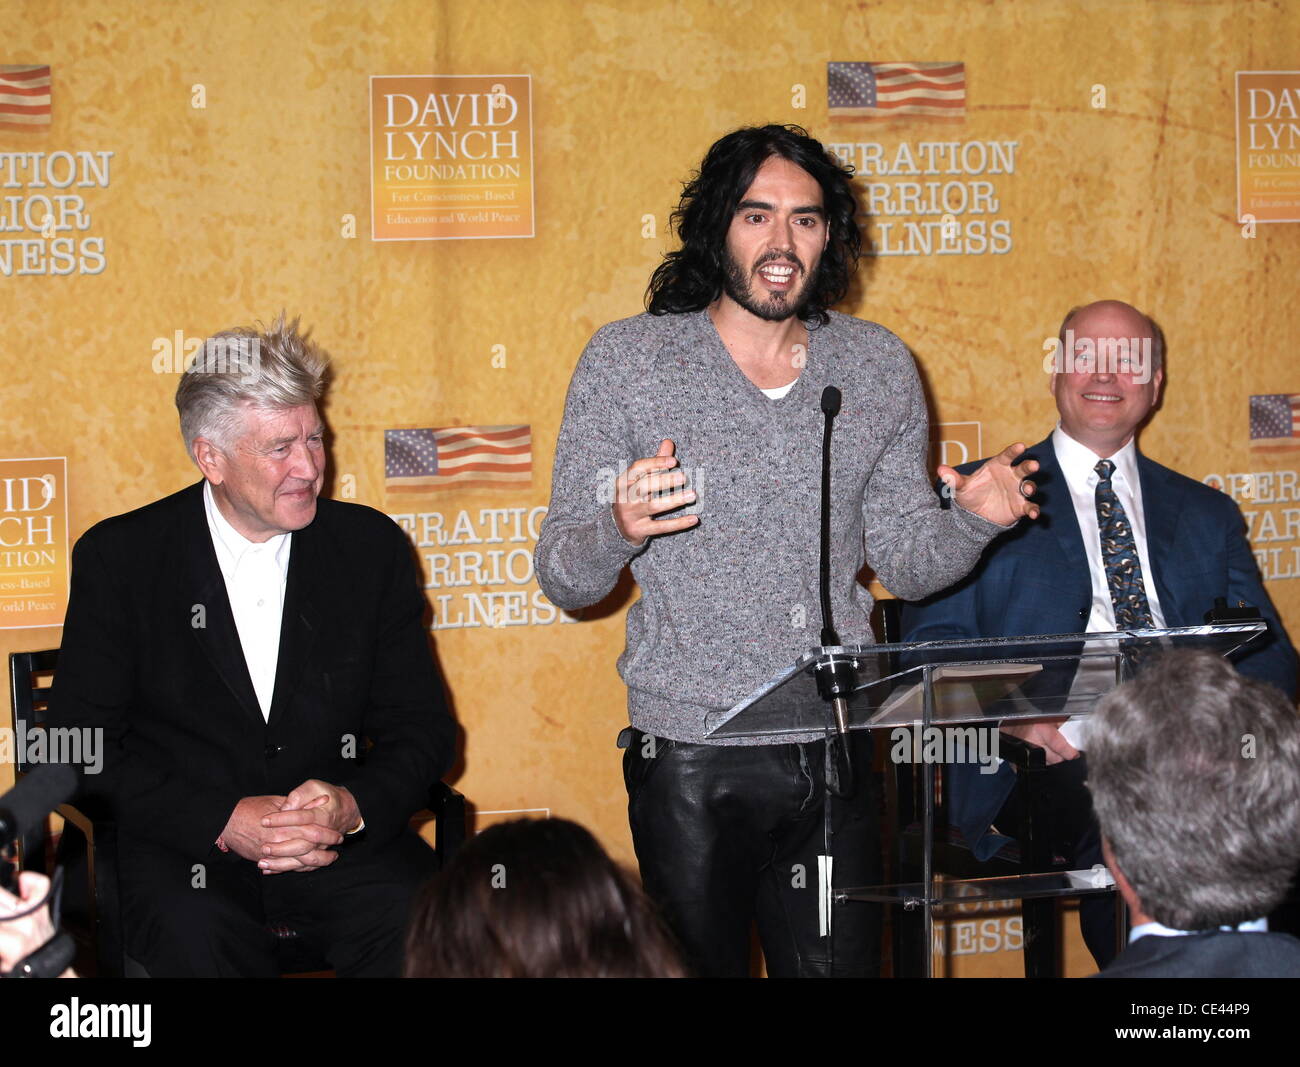 Donna Karan, Russell Brand and David Lynch Press conference for the launch of the 'David Lynch Foundation's Operation Warrior Wellness' held at Paley Center New York City, USA - 13.12.10 Stock Photo